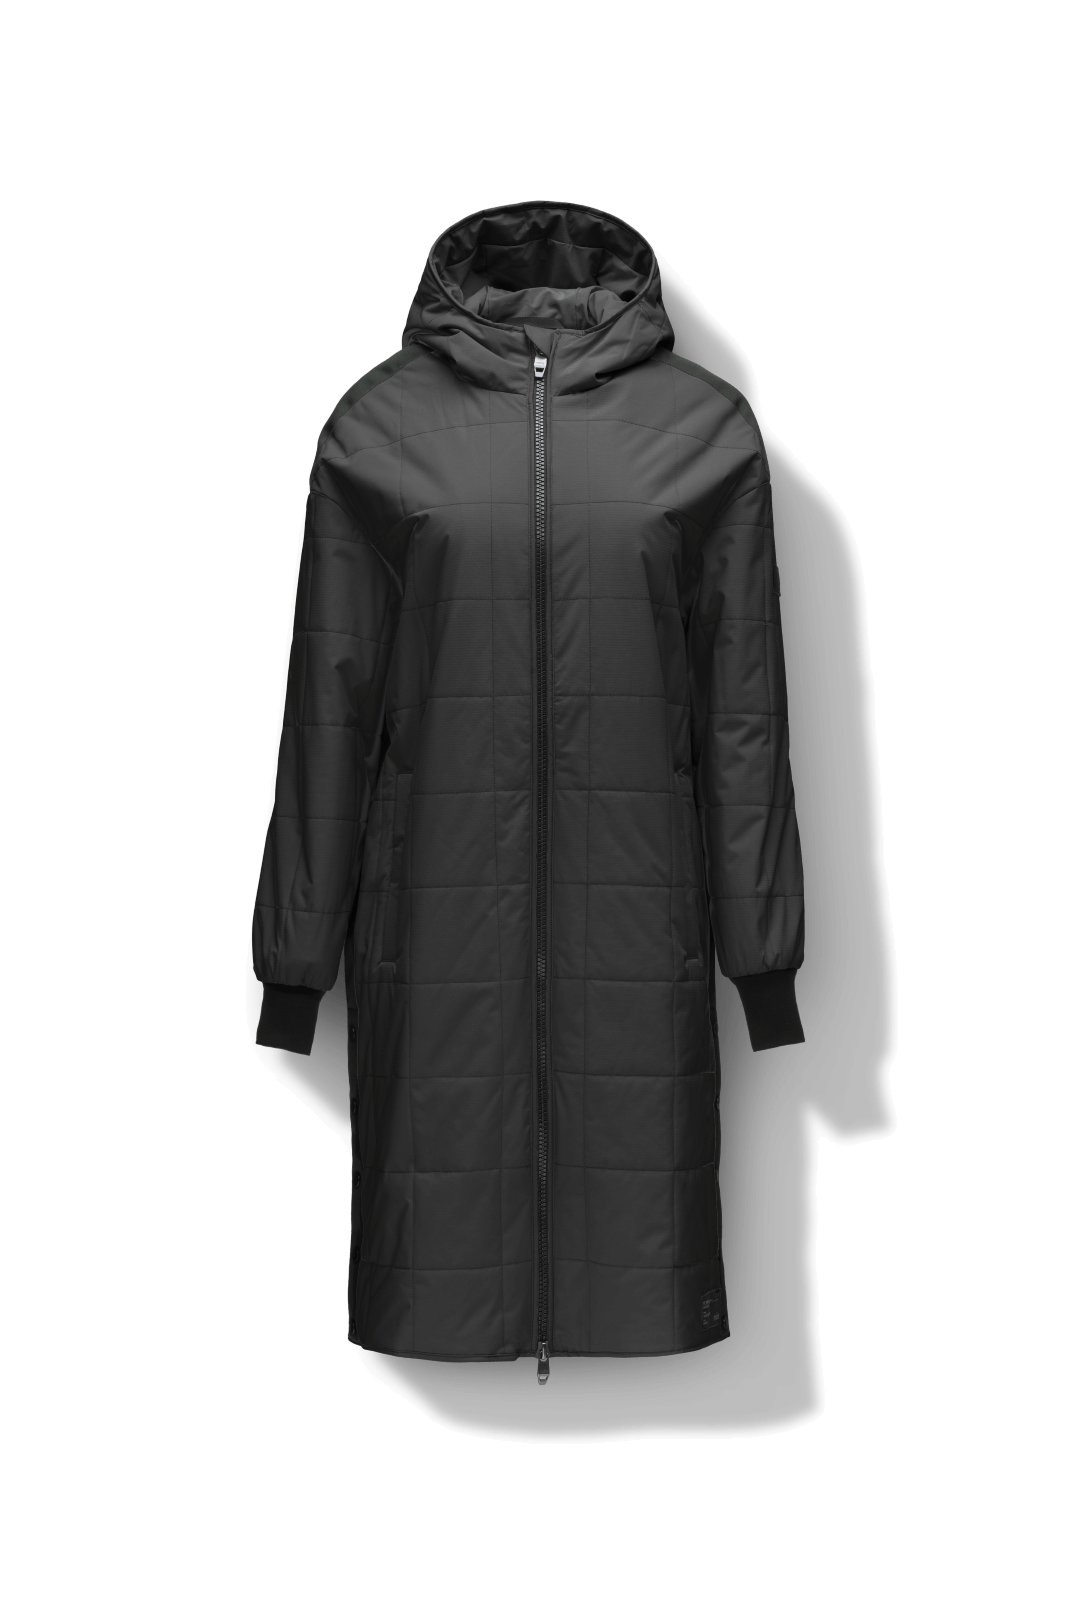 Radar Women's Performance Long Midlayer Jacket in long length, premium stretch ripstop and stretch Toray nylon fabrication, premium 4-way stretch, water resistant Primaloft Gold Insulation Active+, non-removable hood with adjustable draw cord, 2-way branded zipper at centre front, single welt pockets with magnetic closure at hips, elongated ribbed cuffs, grosgrain ribbon detail at shoulder and side seams, and snap closure side seam vent, in Black